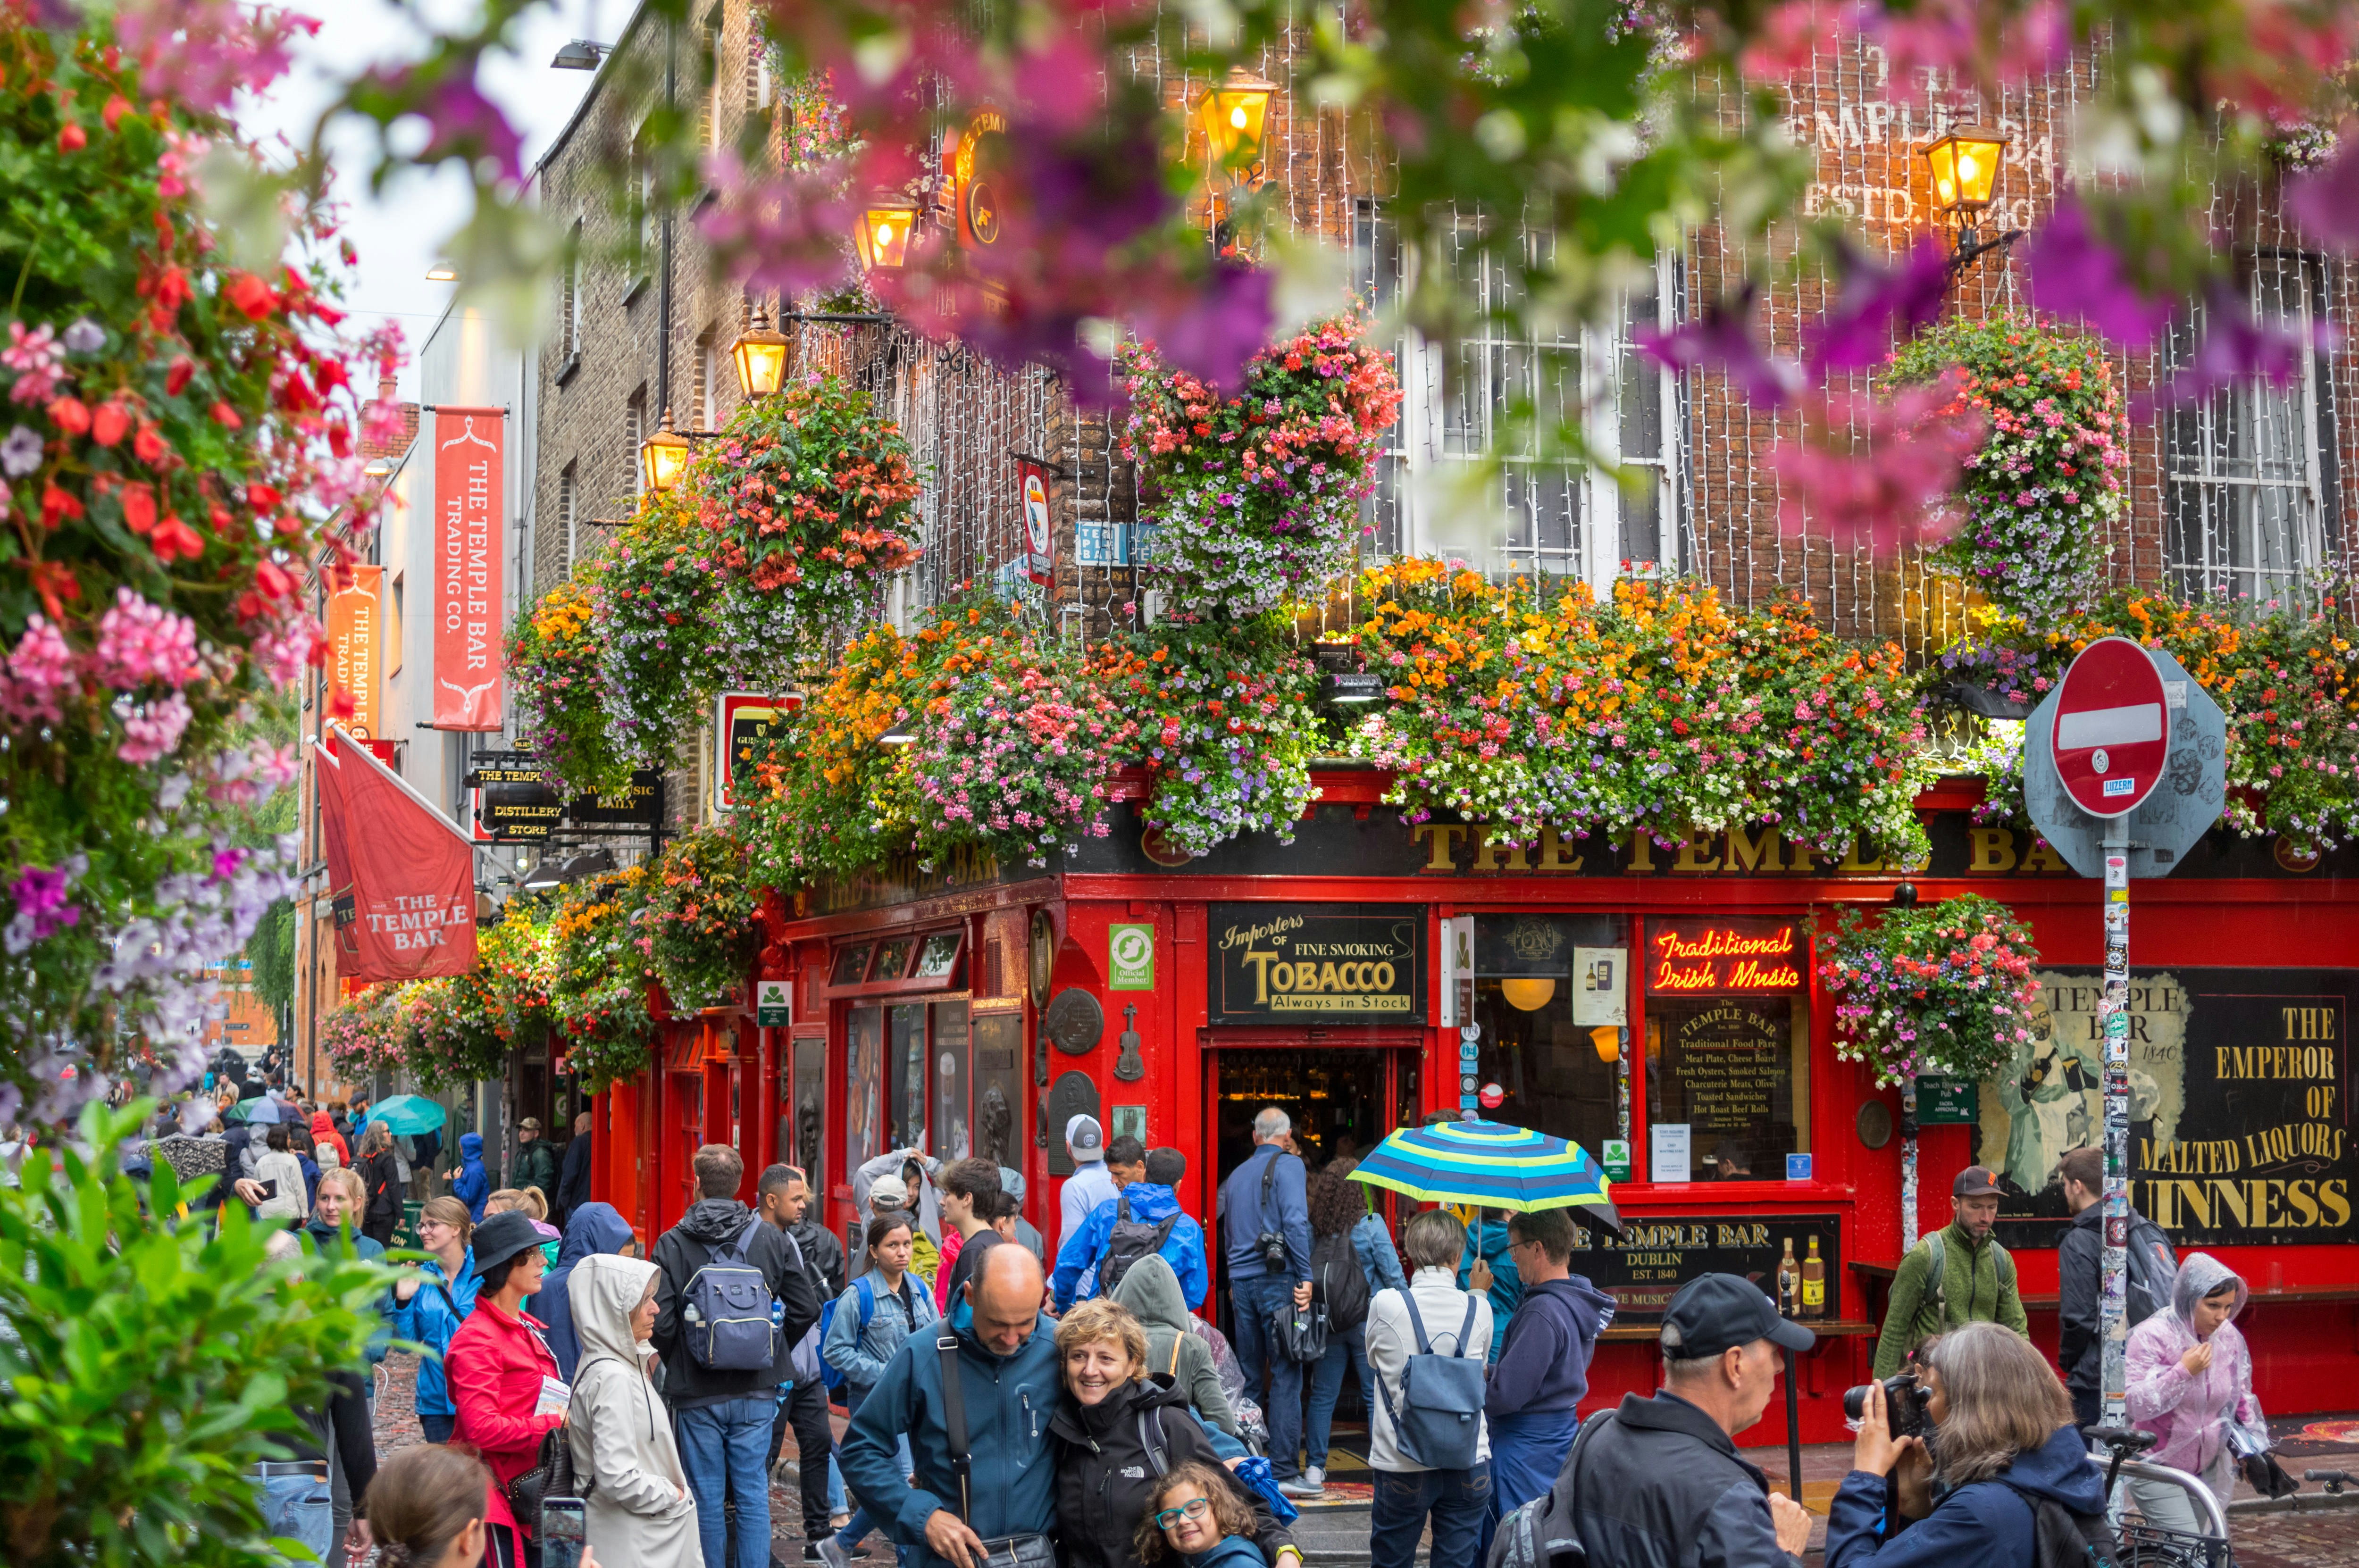 A colourful scene of crowds of people outside The Temple Bar in Dublin. Some walk along the streets while others gather to take photos.